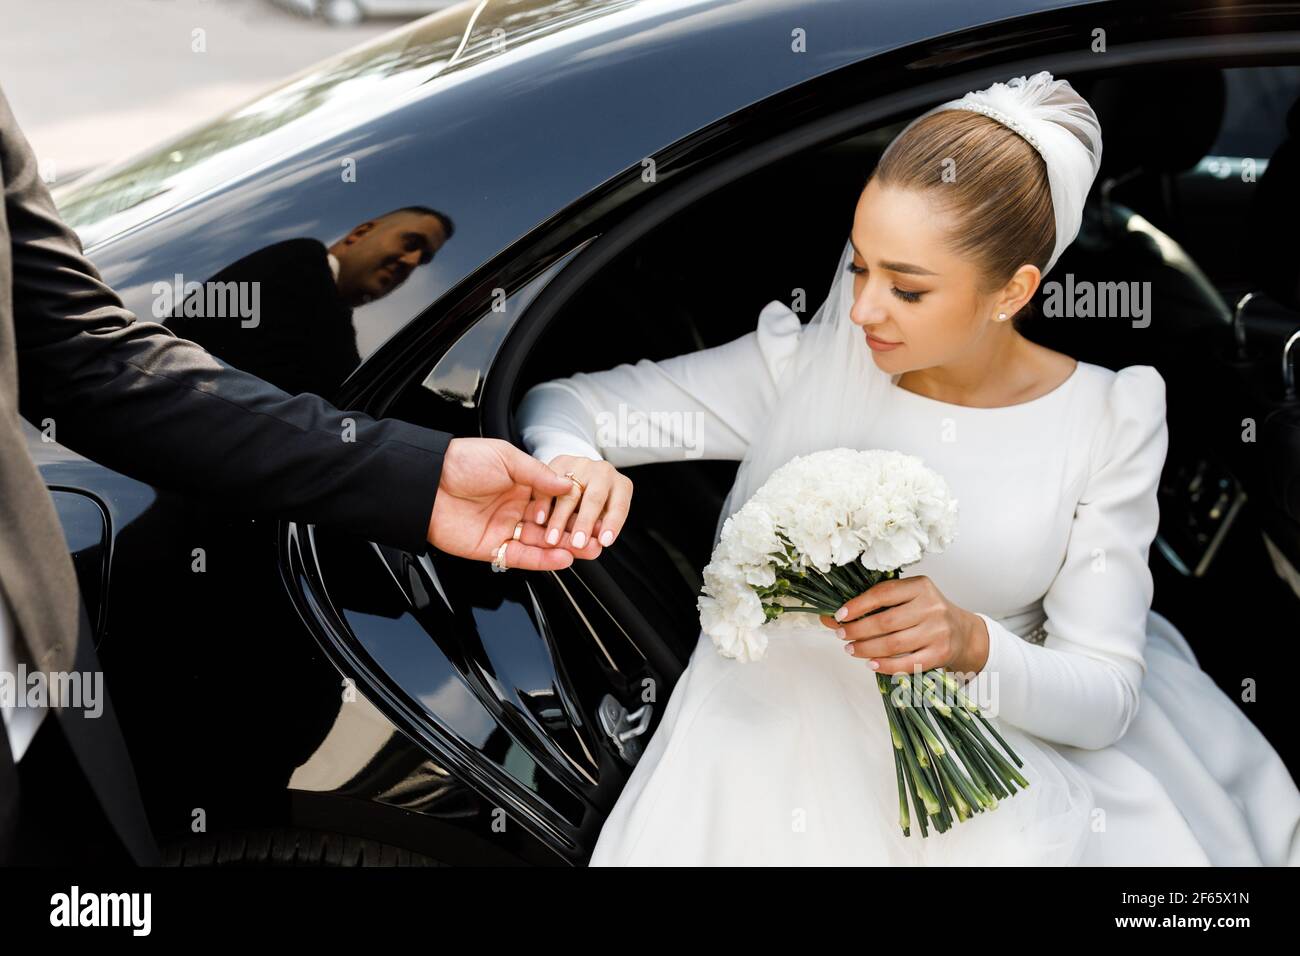 Bride's hand and the hand of the groom while getting out of the car or automobile. True affection. Stock Photo